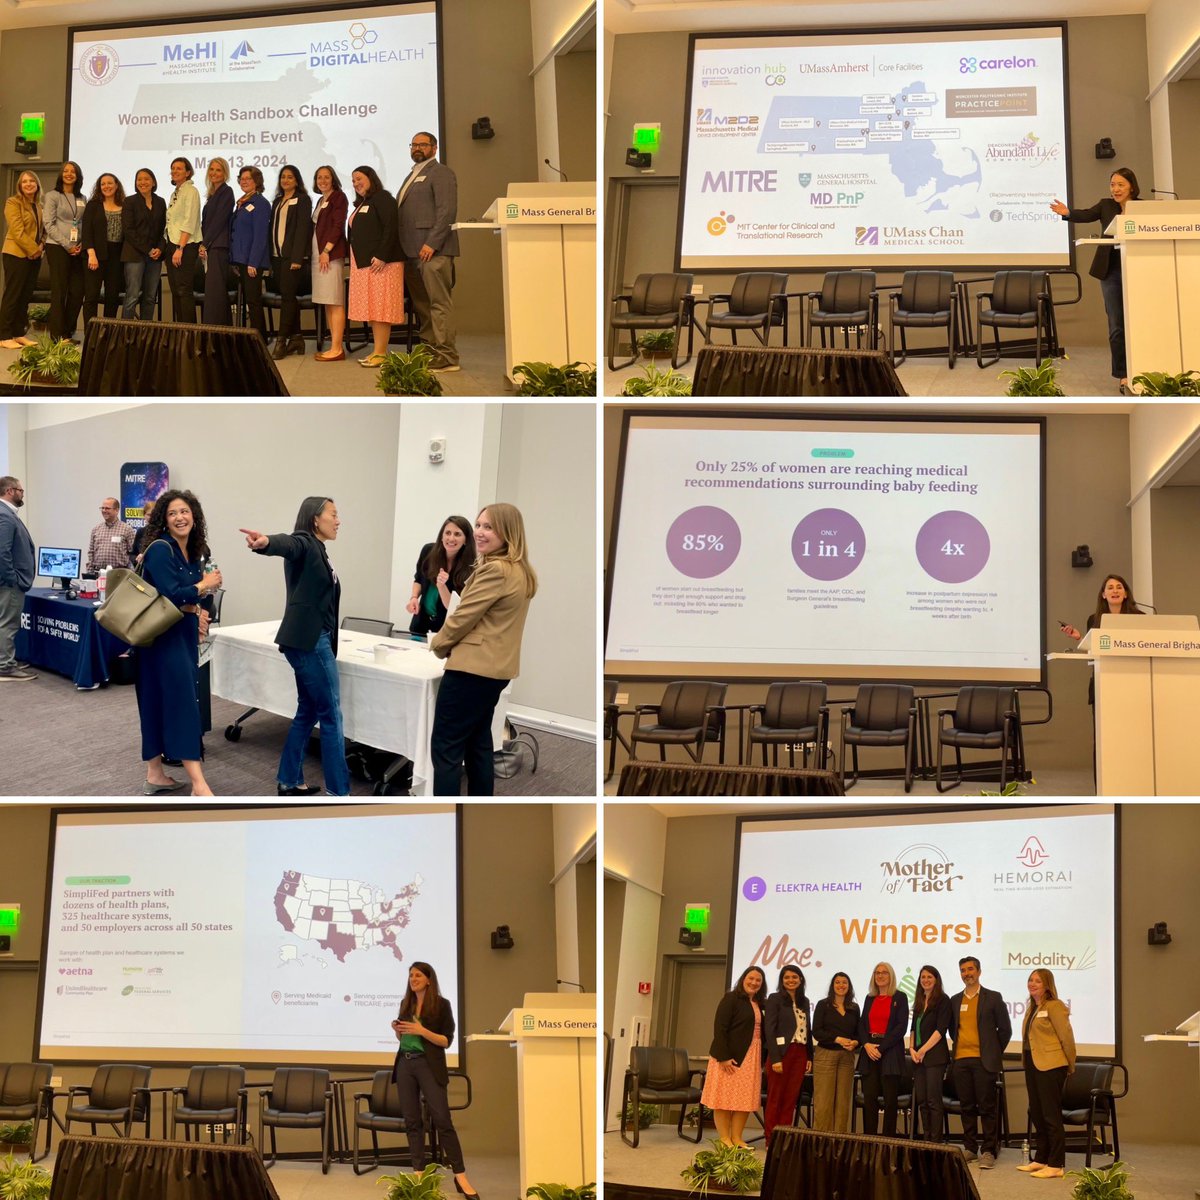 Great Women+ #Health Sandbox Challenge Final Pitch hosted by @Mass_Tech @MassEHealth @MassGenBrigham with highlights from Secretary Yvonne Hao & @ARPAHealth! Congrats @andreakippolito @SimplifedB for being named a winner! #healthcare #innovation #digitalhealth #entrepreneurship